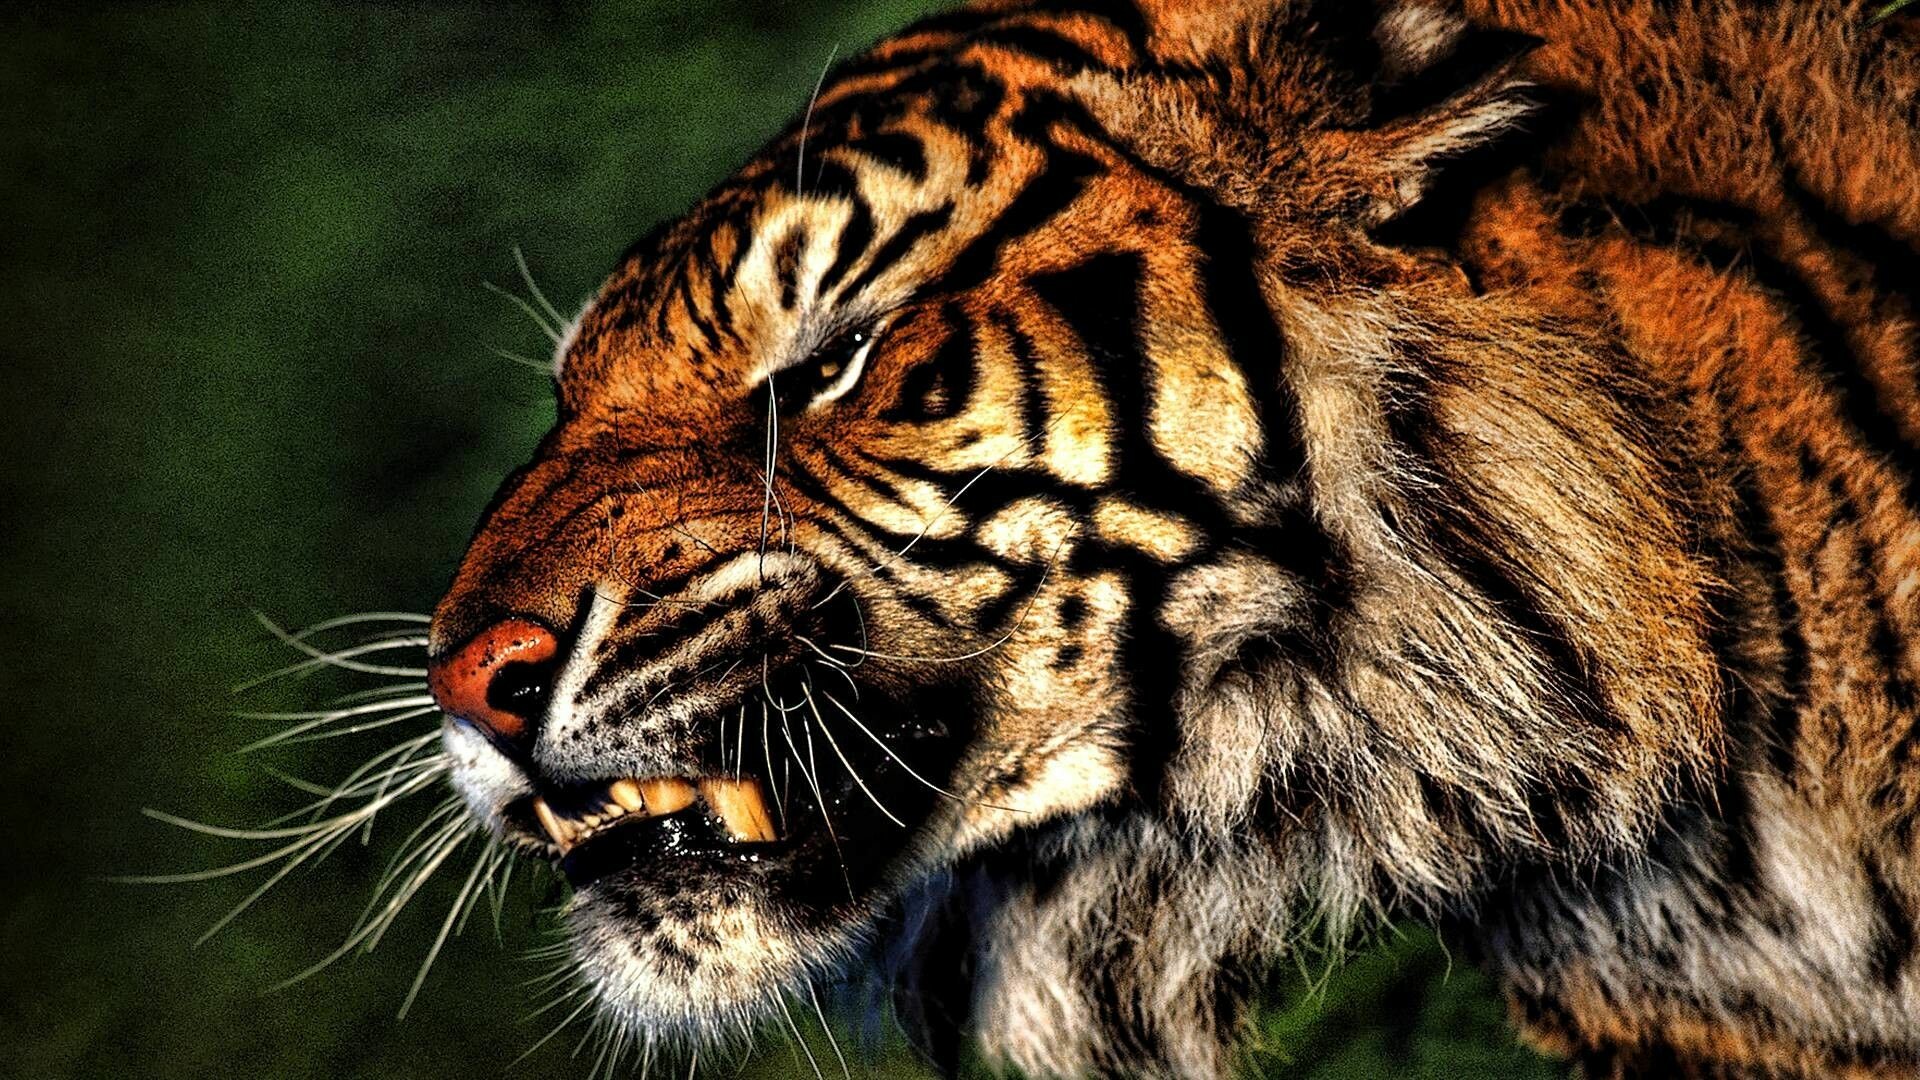 42 Tiger Wallpapers Hd 4k 5k For Pc And Mobile Download Free Images For Iphone Android